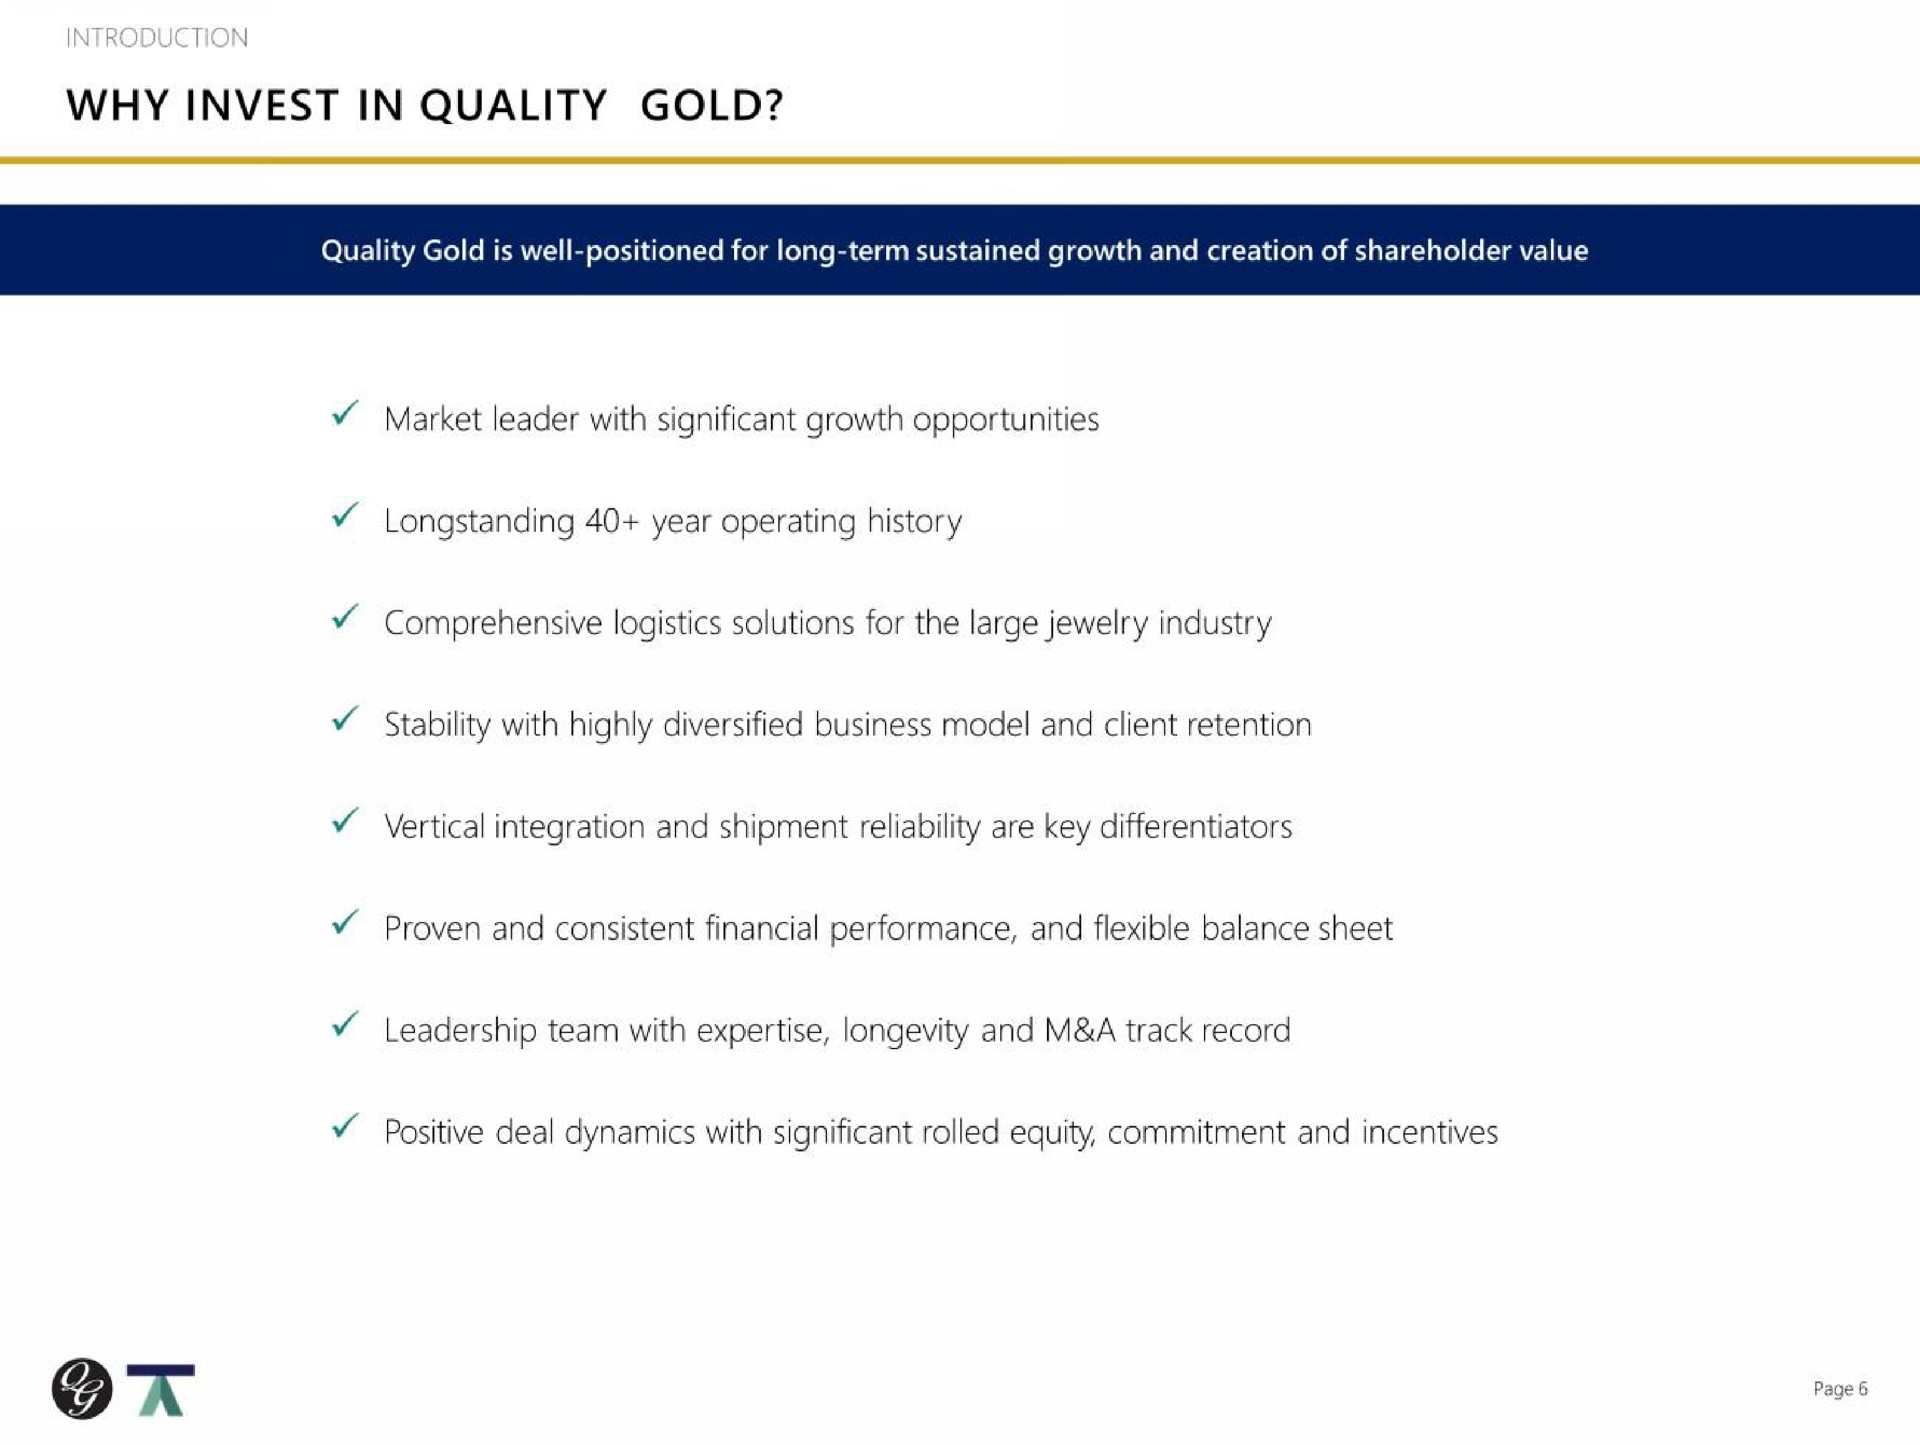 introduction why invest in quality gold market leader with significant growth opportunities year operating history comprehensive logistics solutions for the large jewelry industry vertical integration and shipment reliability are key differentiators proven and consistent financial performance and flexible balance sheet leadership team with longevity and a track record positive deal dynamics with significant rolled equity commitment and incentives | Quality Gold